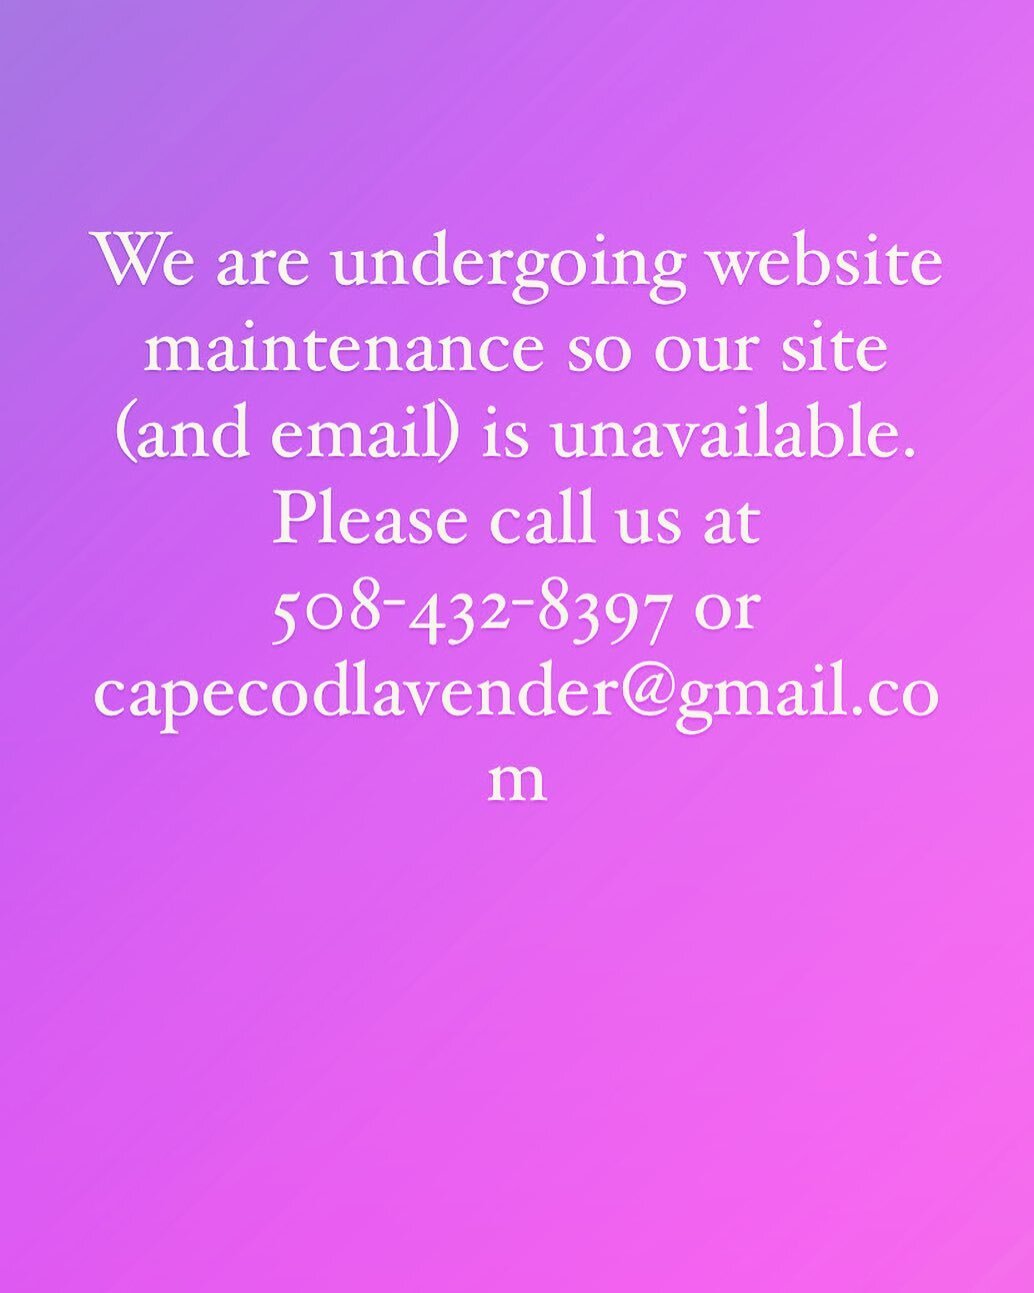 Our email and website is down for maintenance. Please call 508-432-8397 or our gmail account capecodlavender@gmail.com in the interim. Thank you!